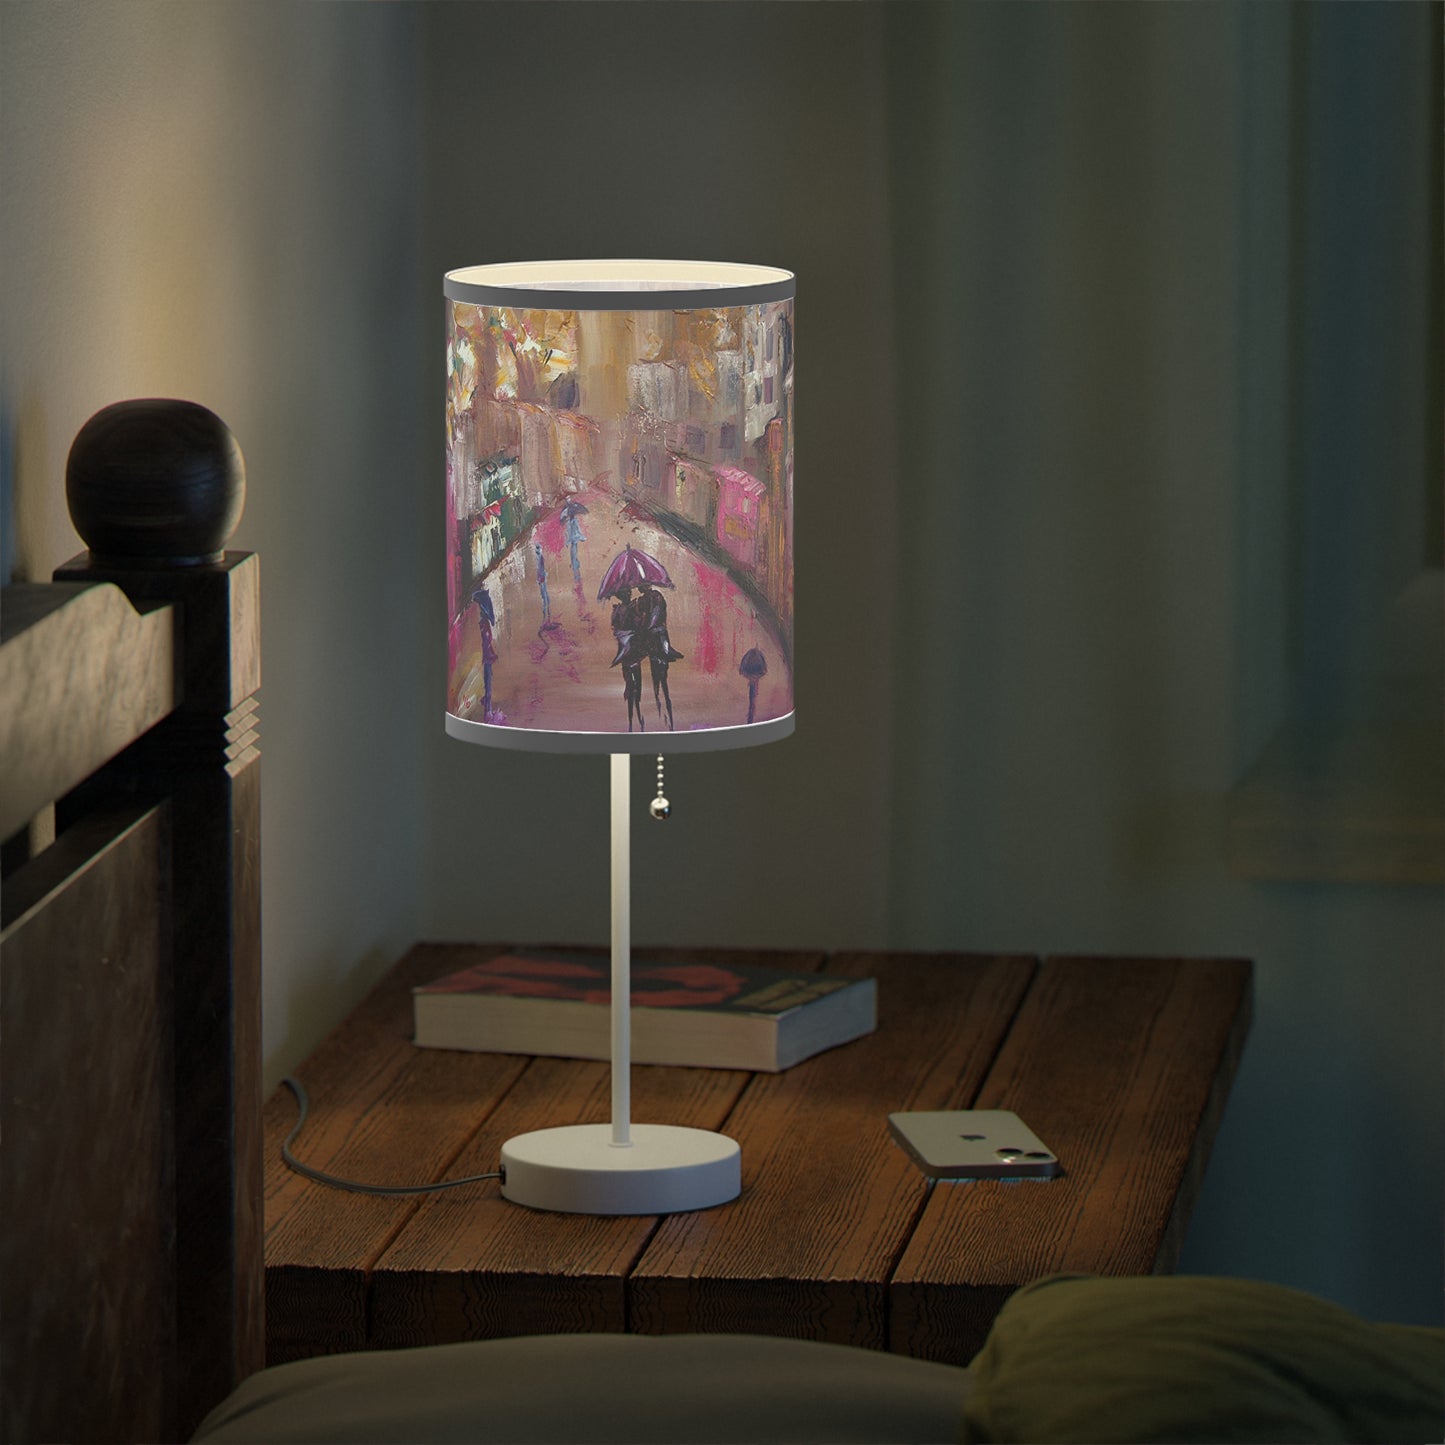 Lampe Lucky in Love sur pied, prise US|CA